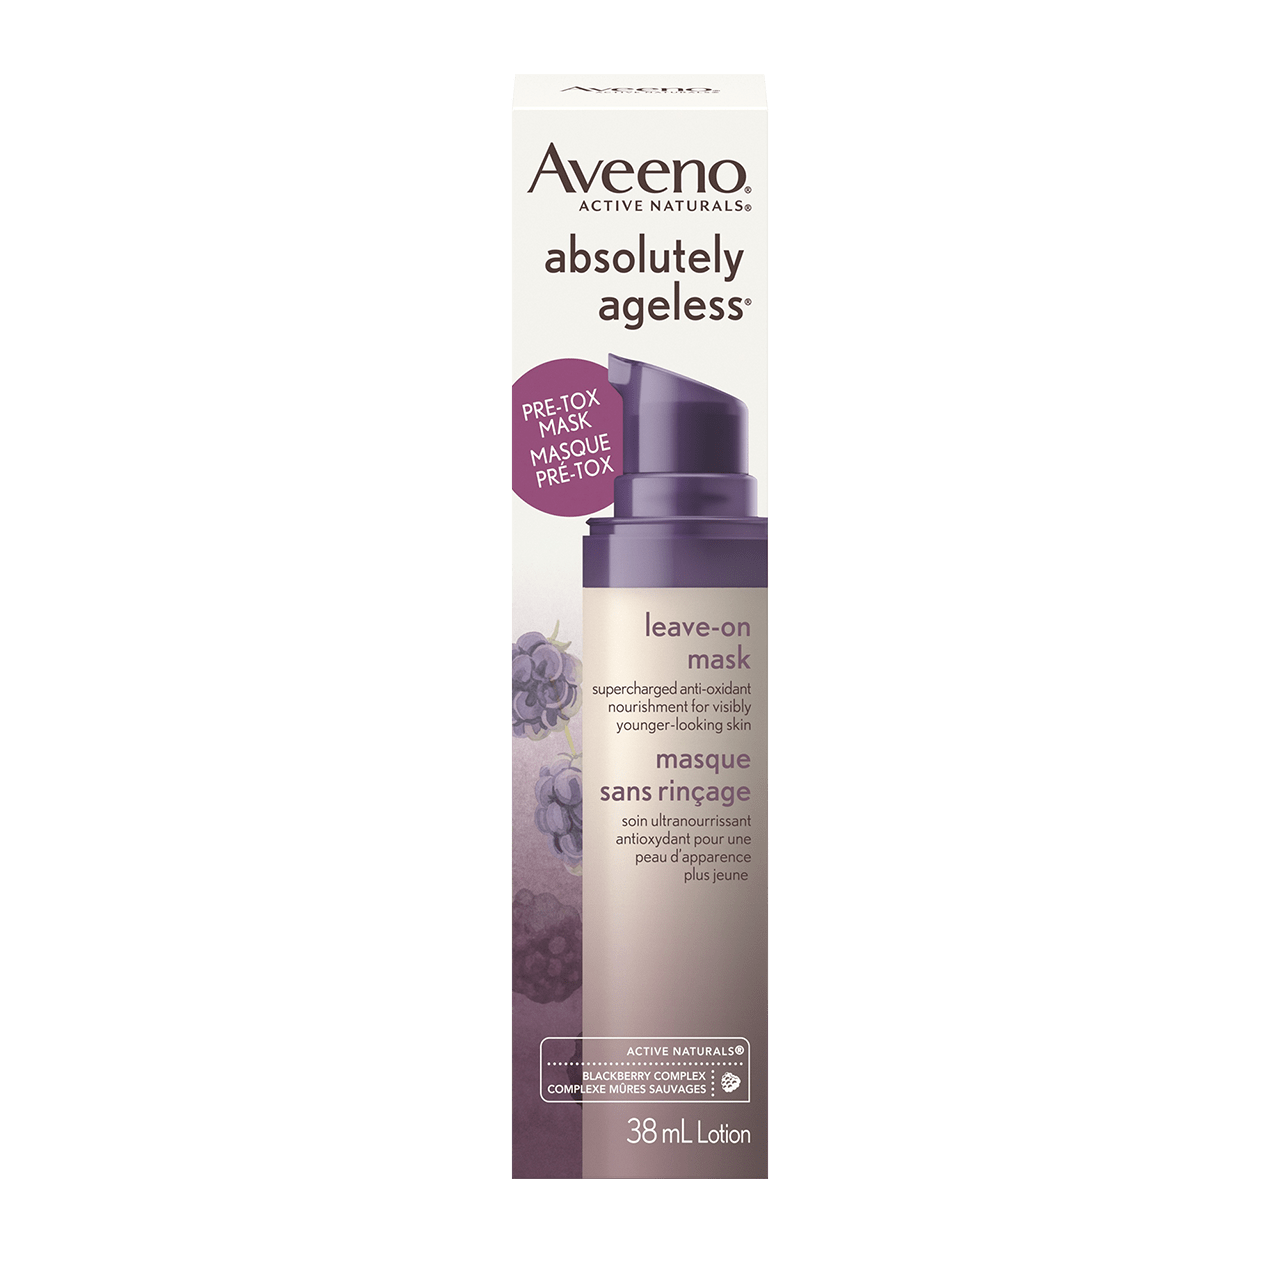 AVEENO® Absolutely Ageless Leave-on Mask Package, 38ml lotion